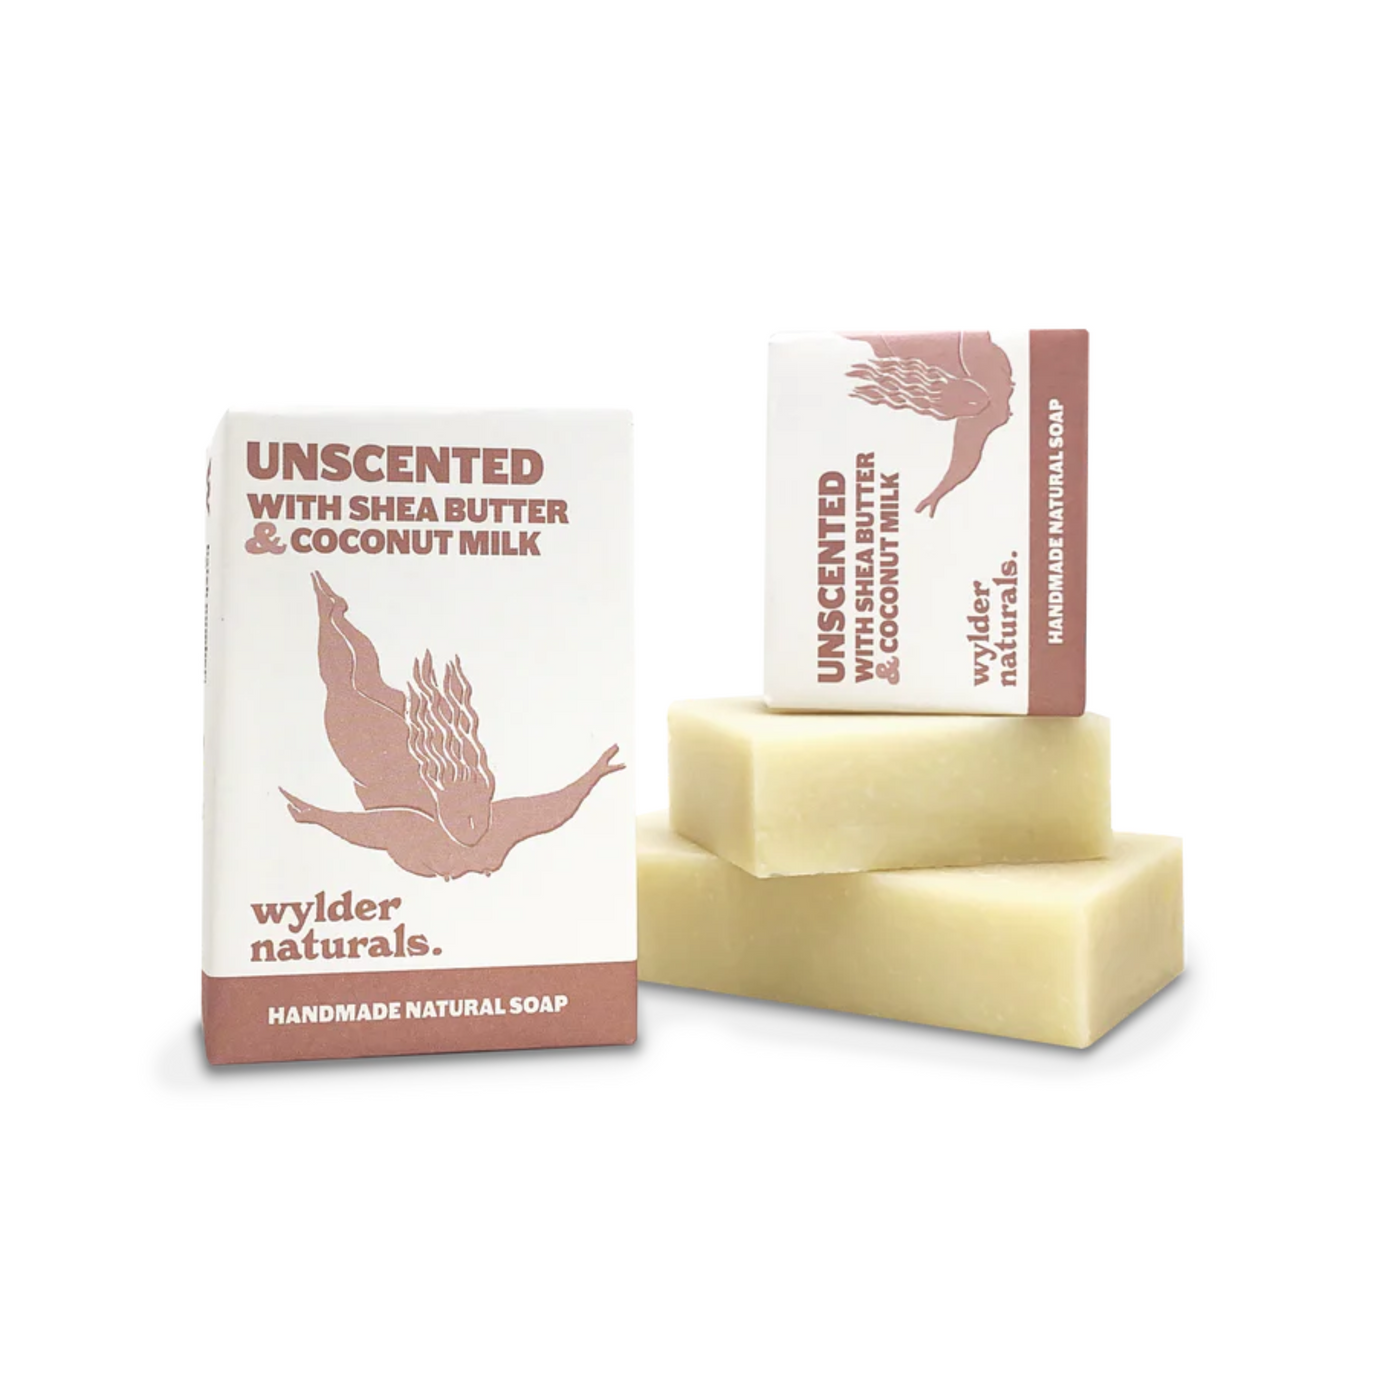 Wylder Naturals Unscented Soap with Coconut Milk & Shea Butter - Radical Giving